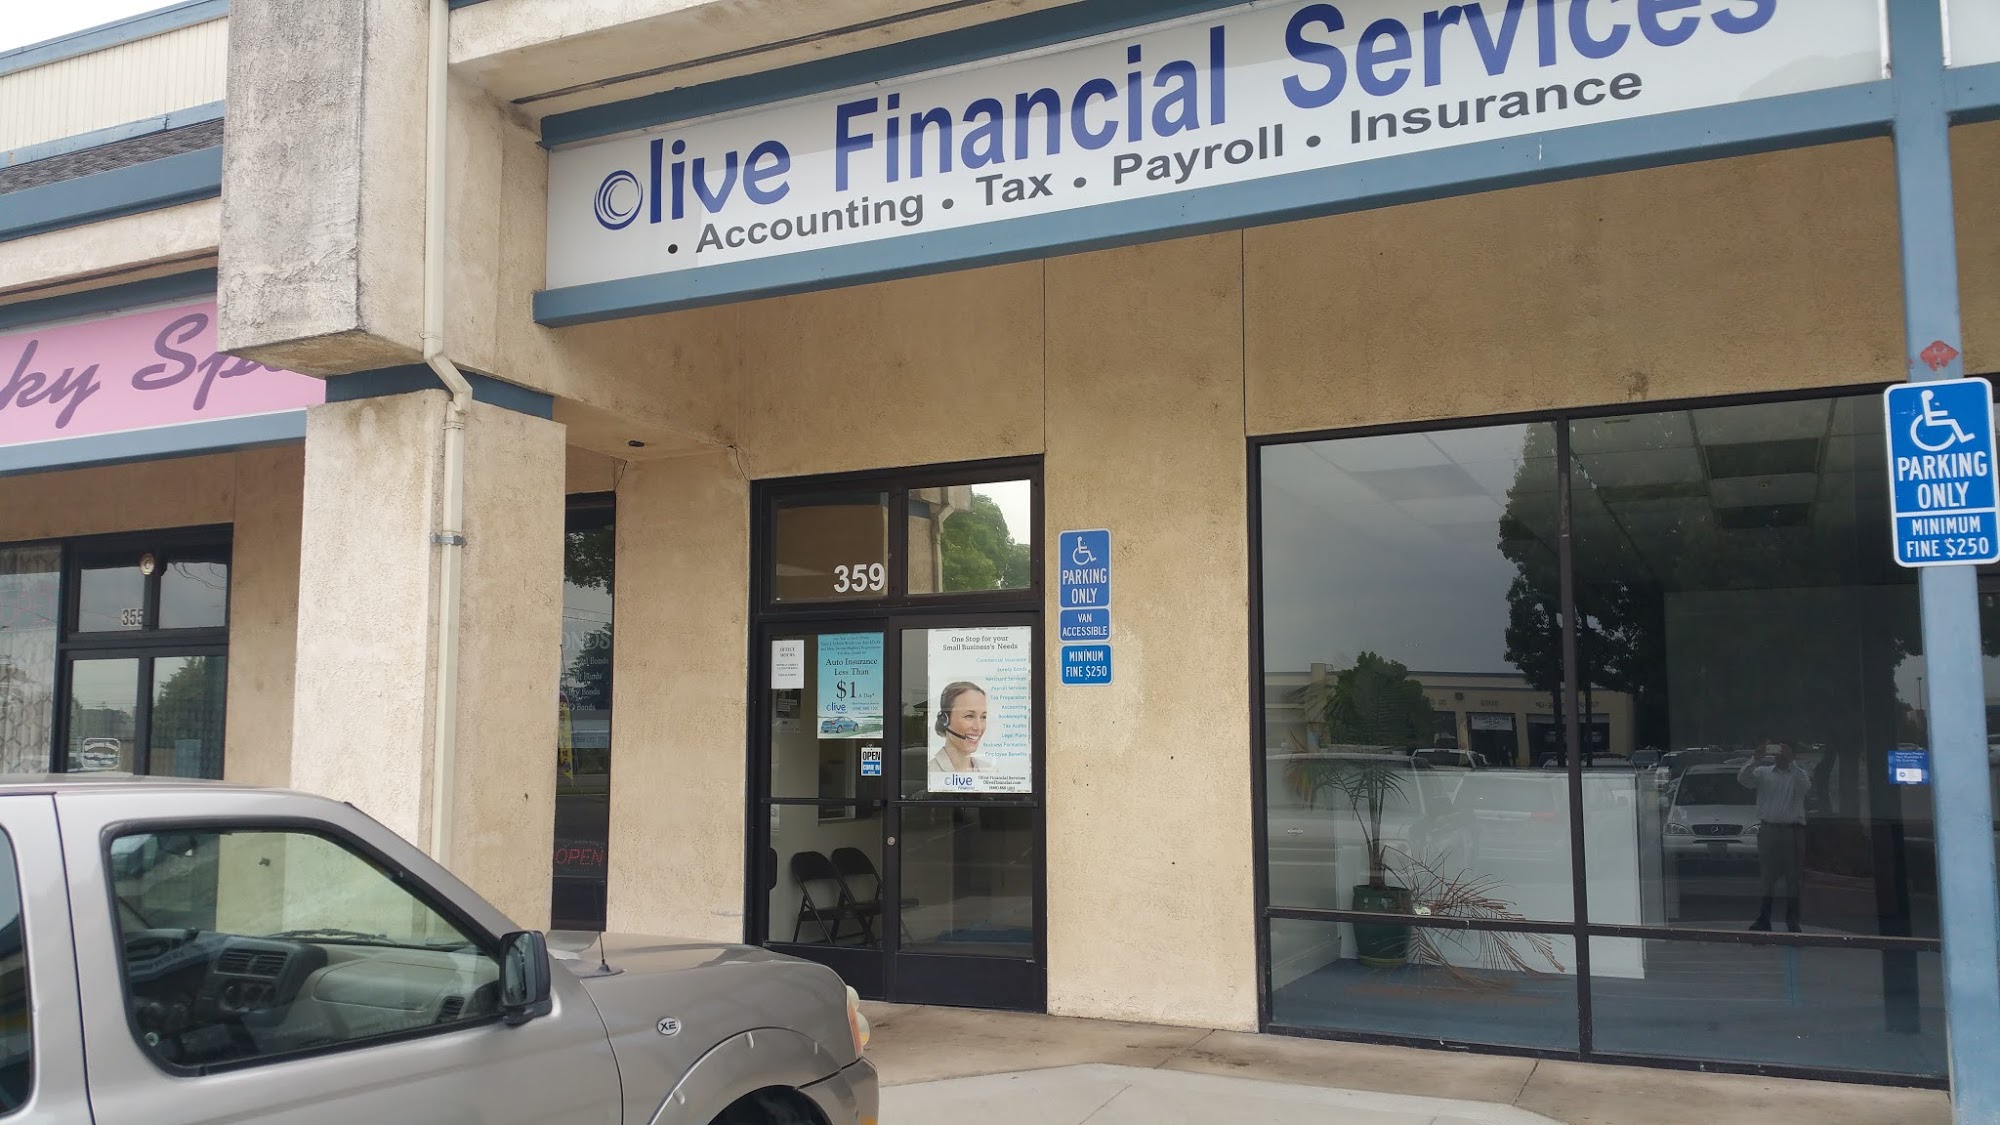 Olive Financial Services - Insurance, Tax, Payroll & Bookkeeping